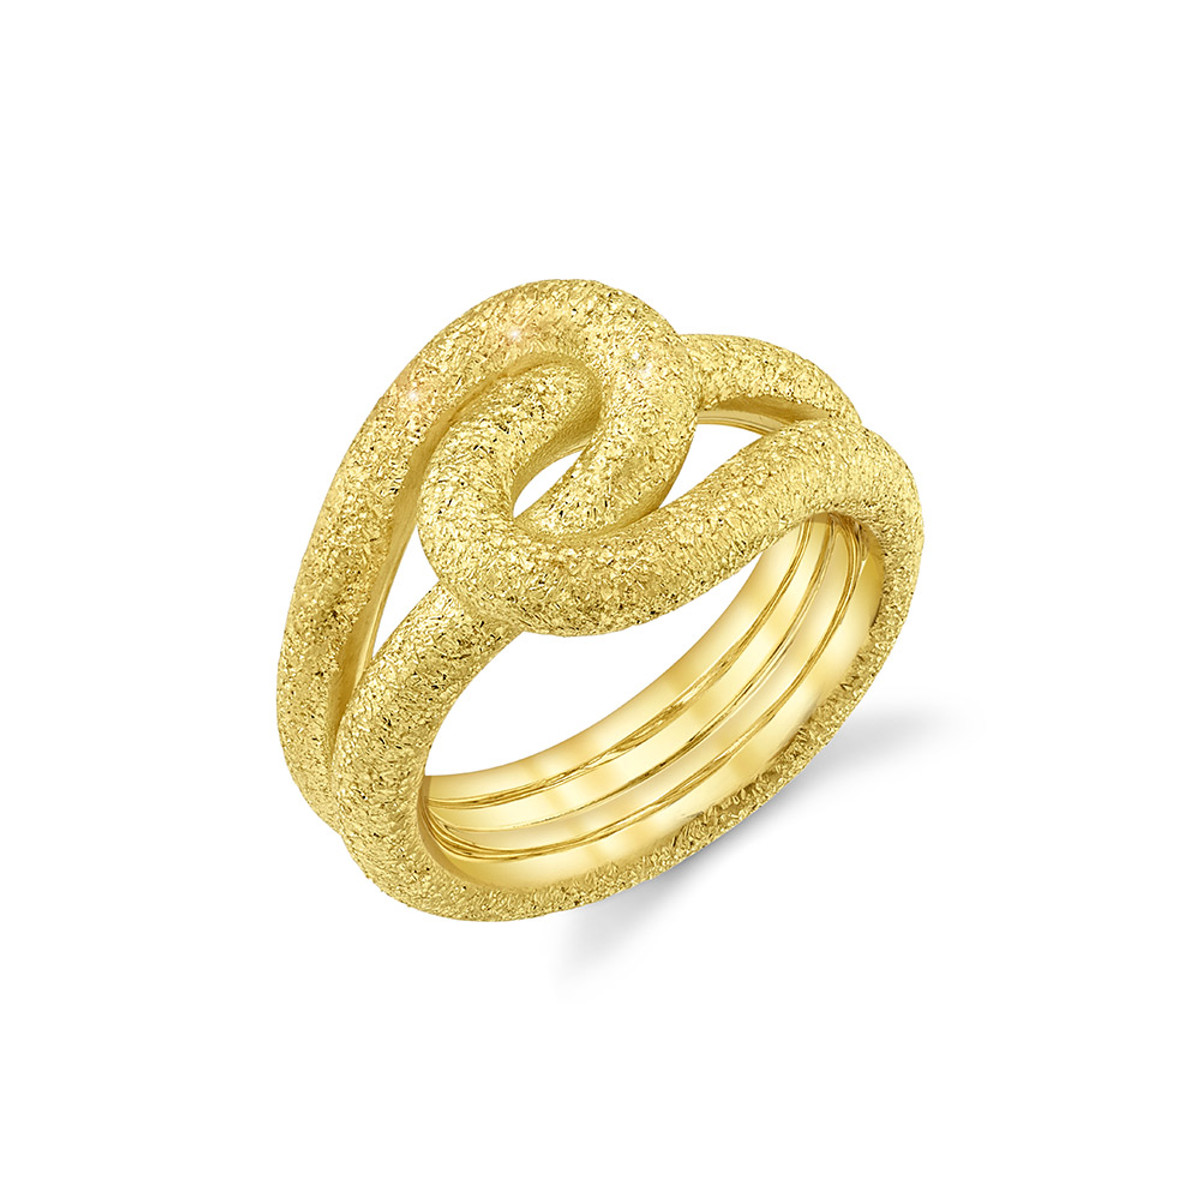 Future Fortune 18K Yellow Gold Infinity Knot Sparkle Ring-55983 Product Image